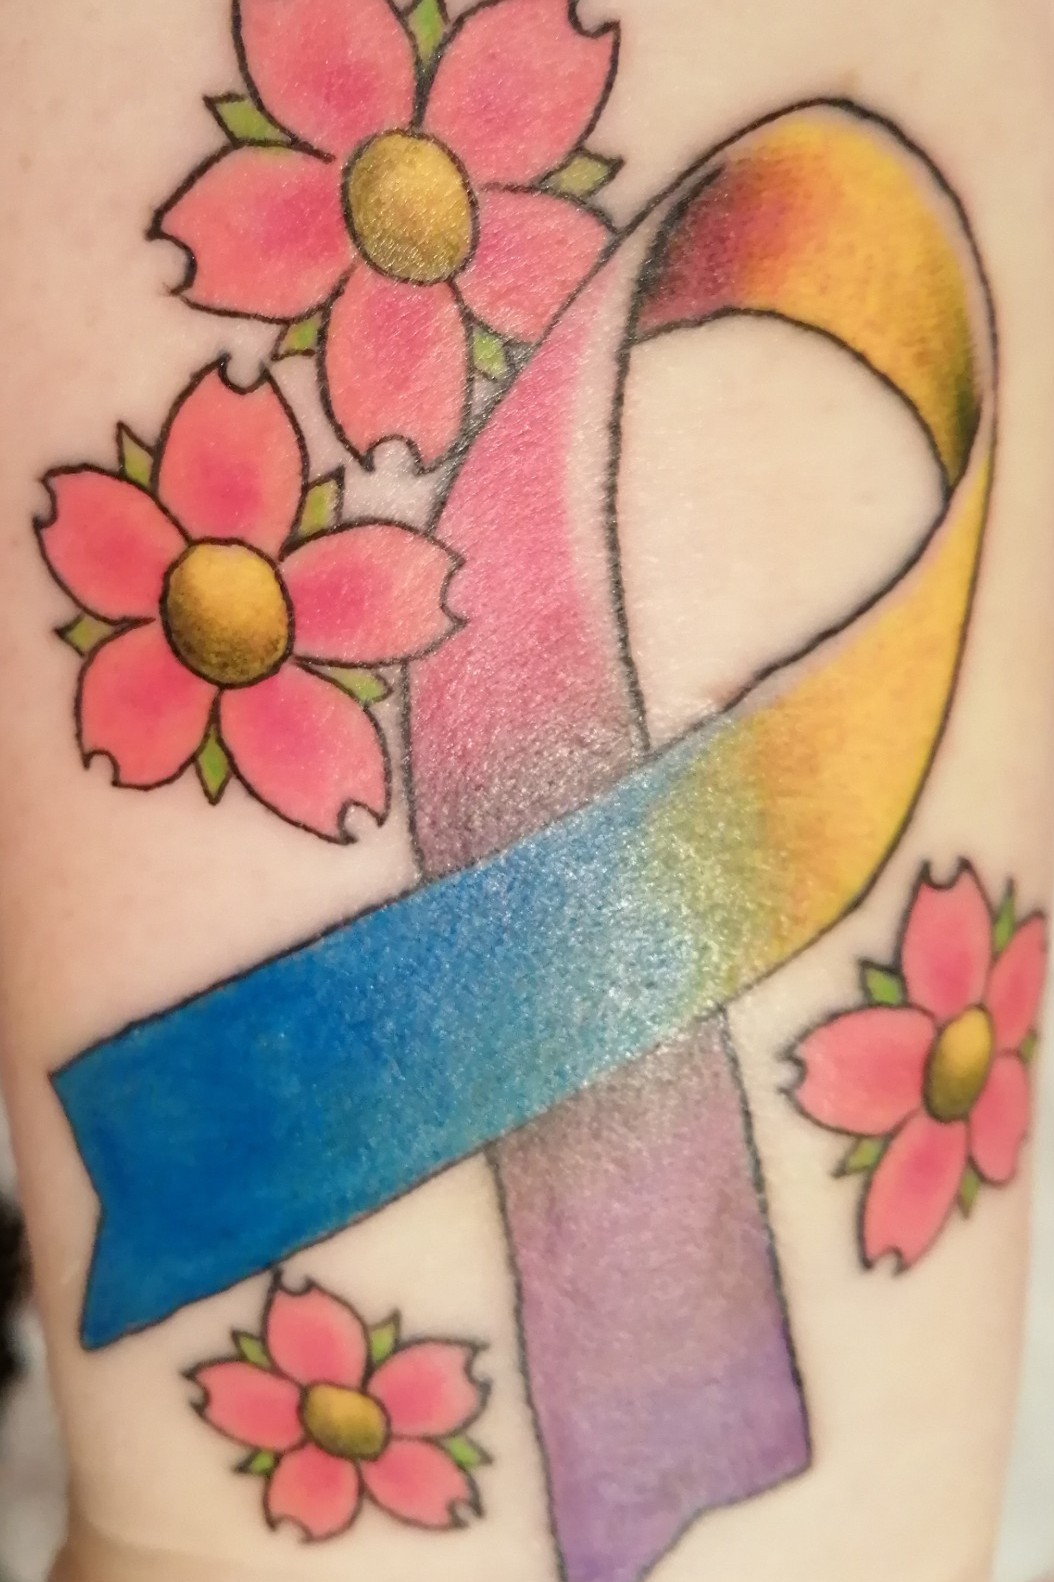 85 Beautiful Cancer Ribbon Tattoos And Their Meaning  AuthorityTattoo